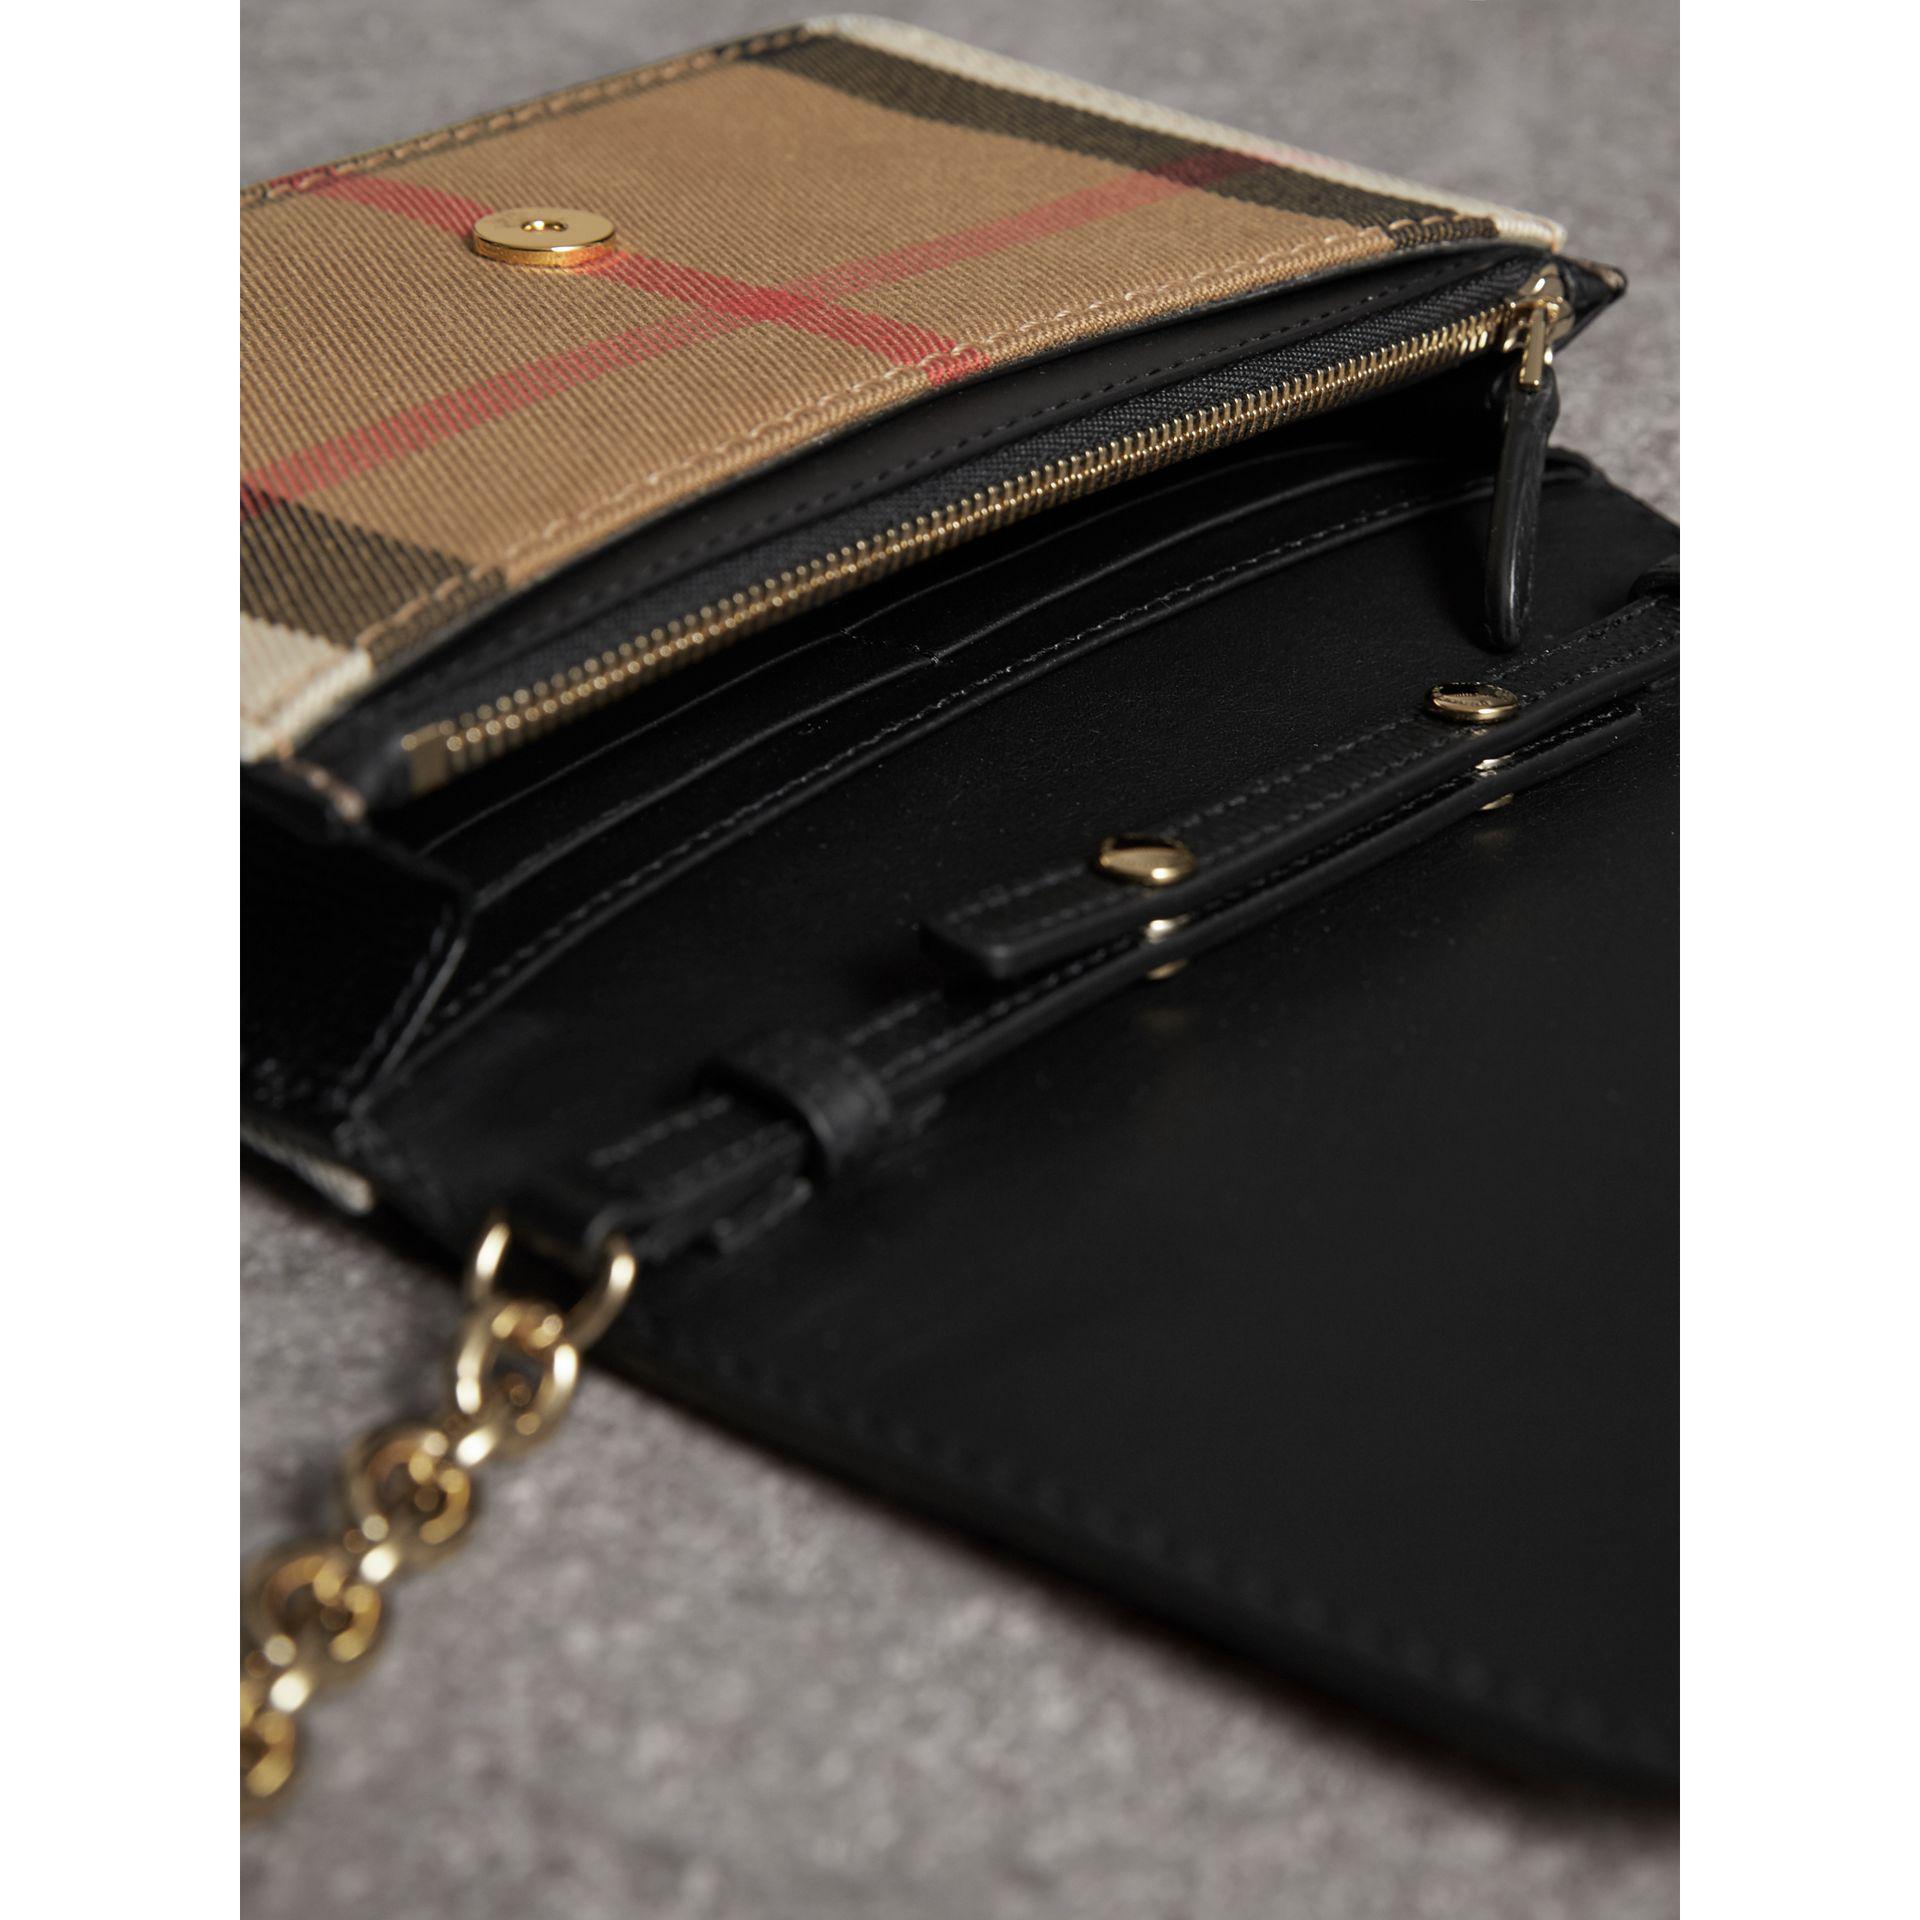 burberry leather and house check wallet with detachable strap